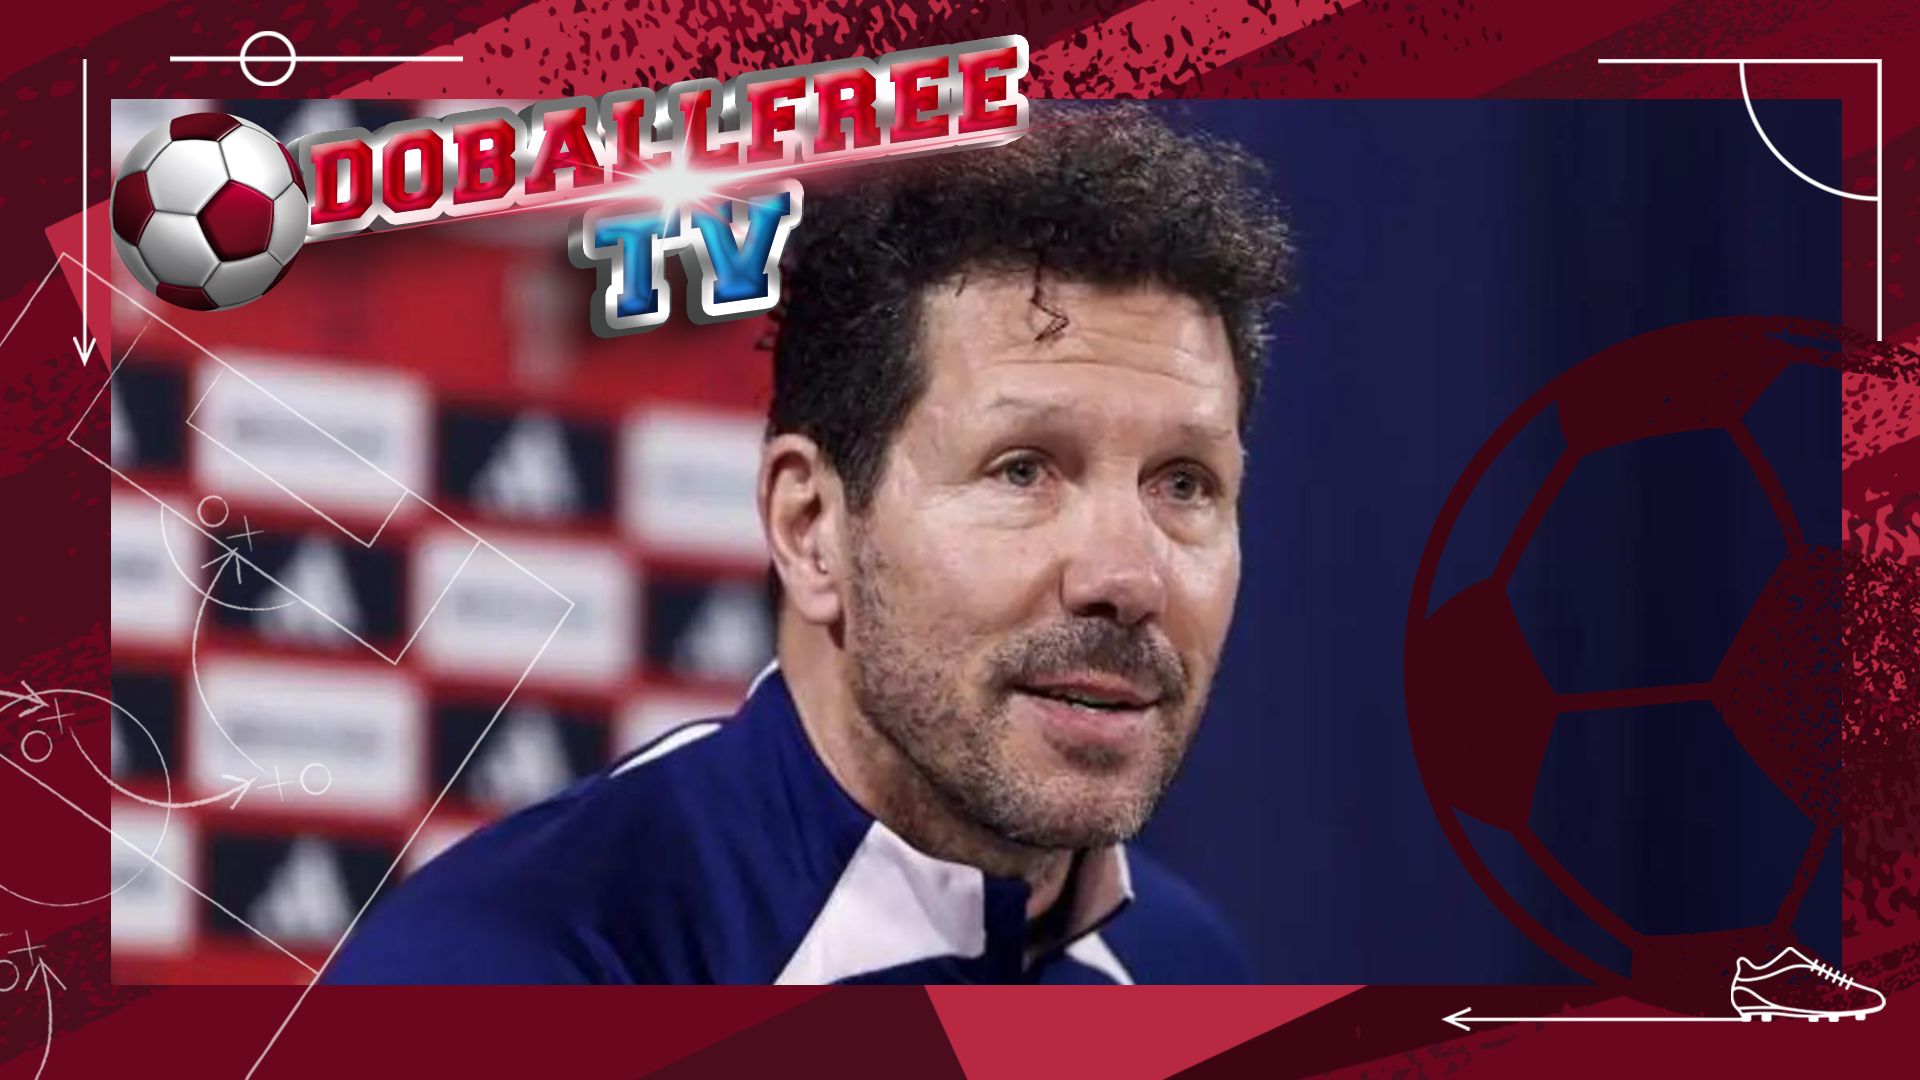 Simeone has confidence in his team Even though real madrid